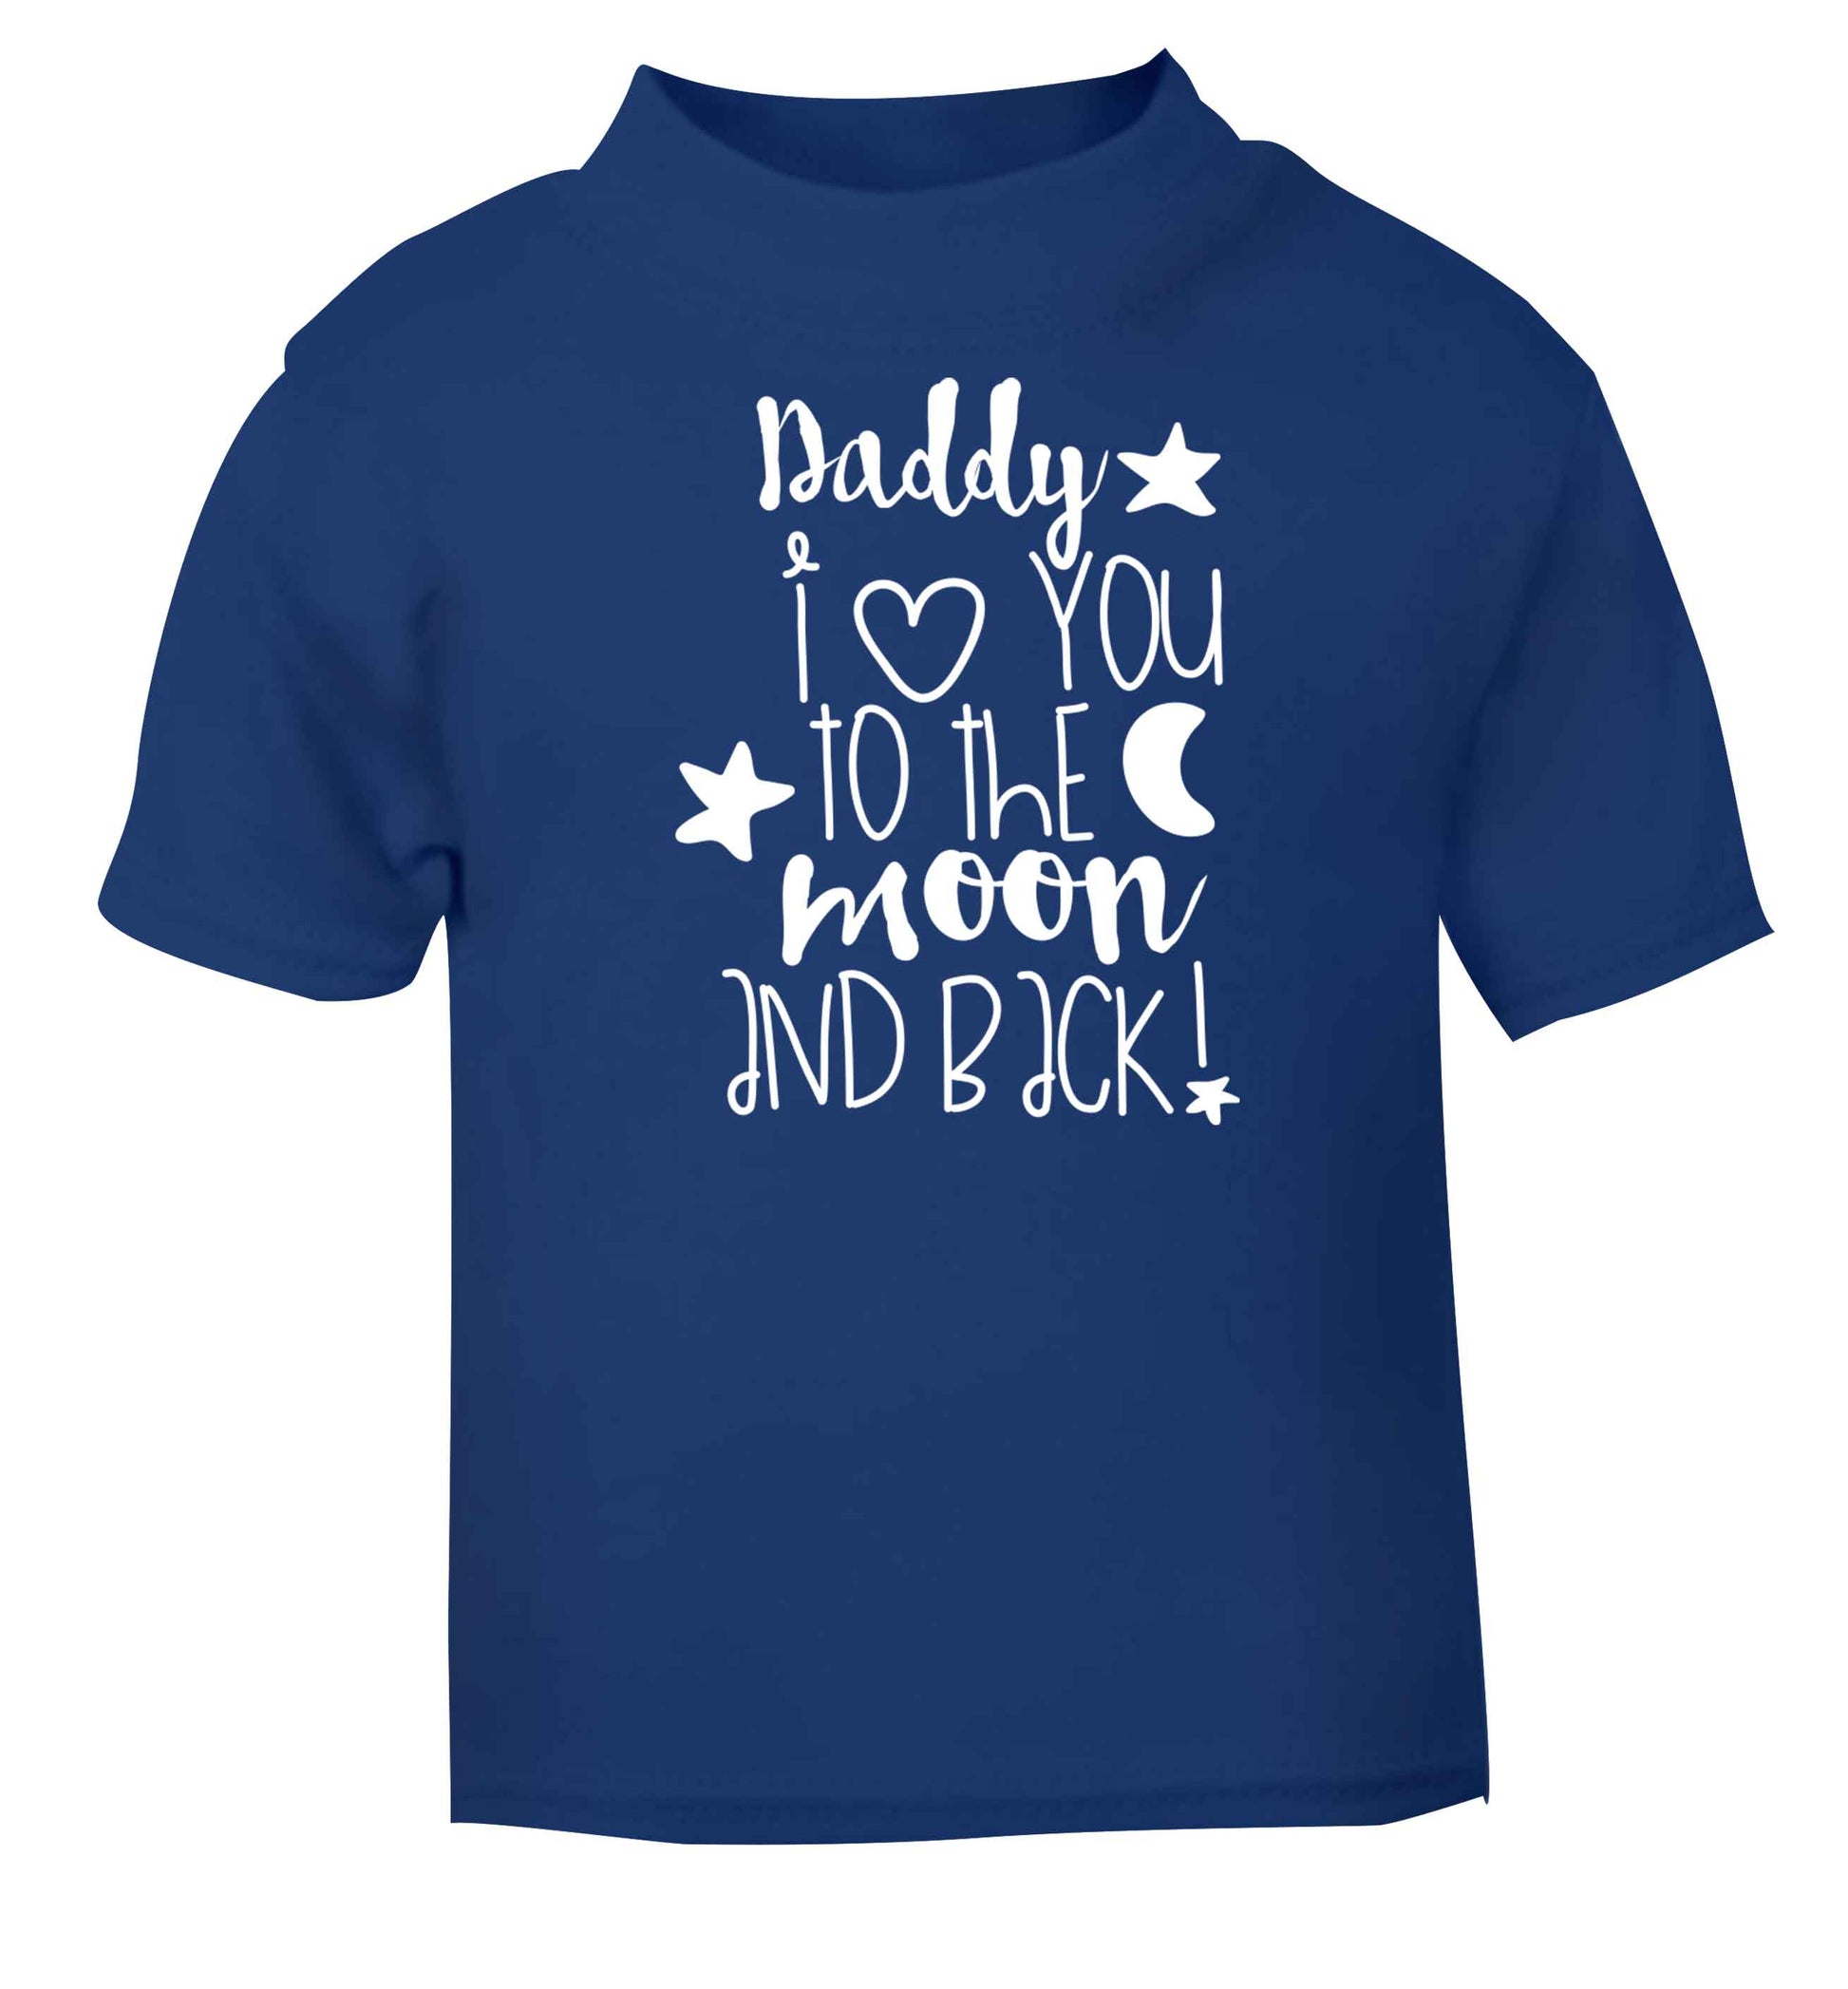 Daddy I love you to the moon and back blue baby toddler Tshirt 2 Years